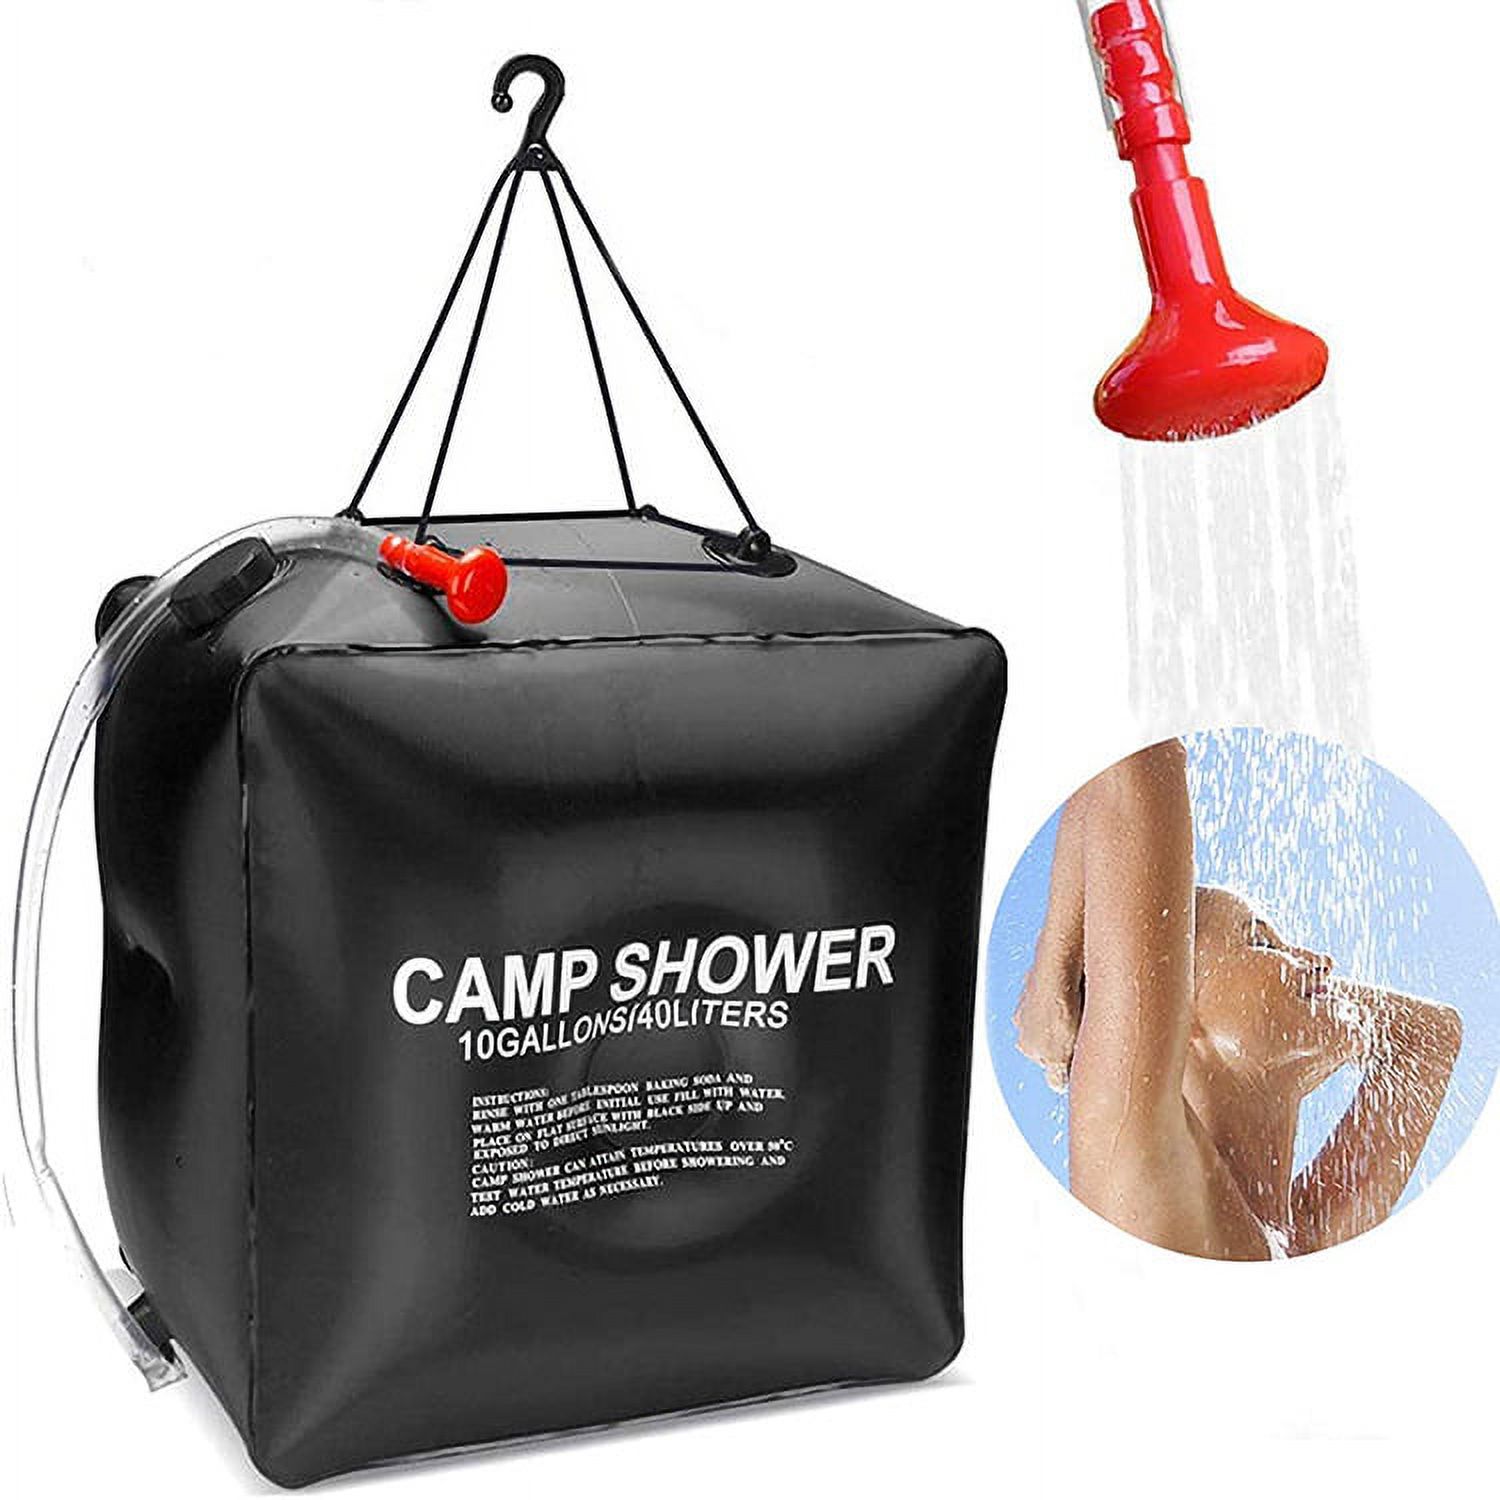 Tkse Solar Shower Bag Portable Shower for Camping Heating Camping Shower Bag 40L Foldable Hot Water for Camping Beach Swimming Outdoor Traveling